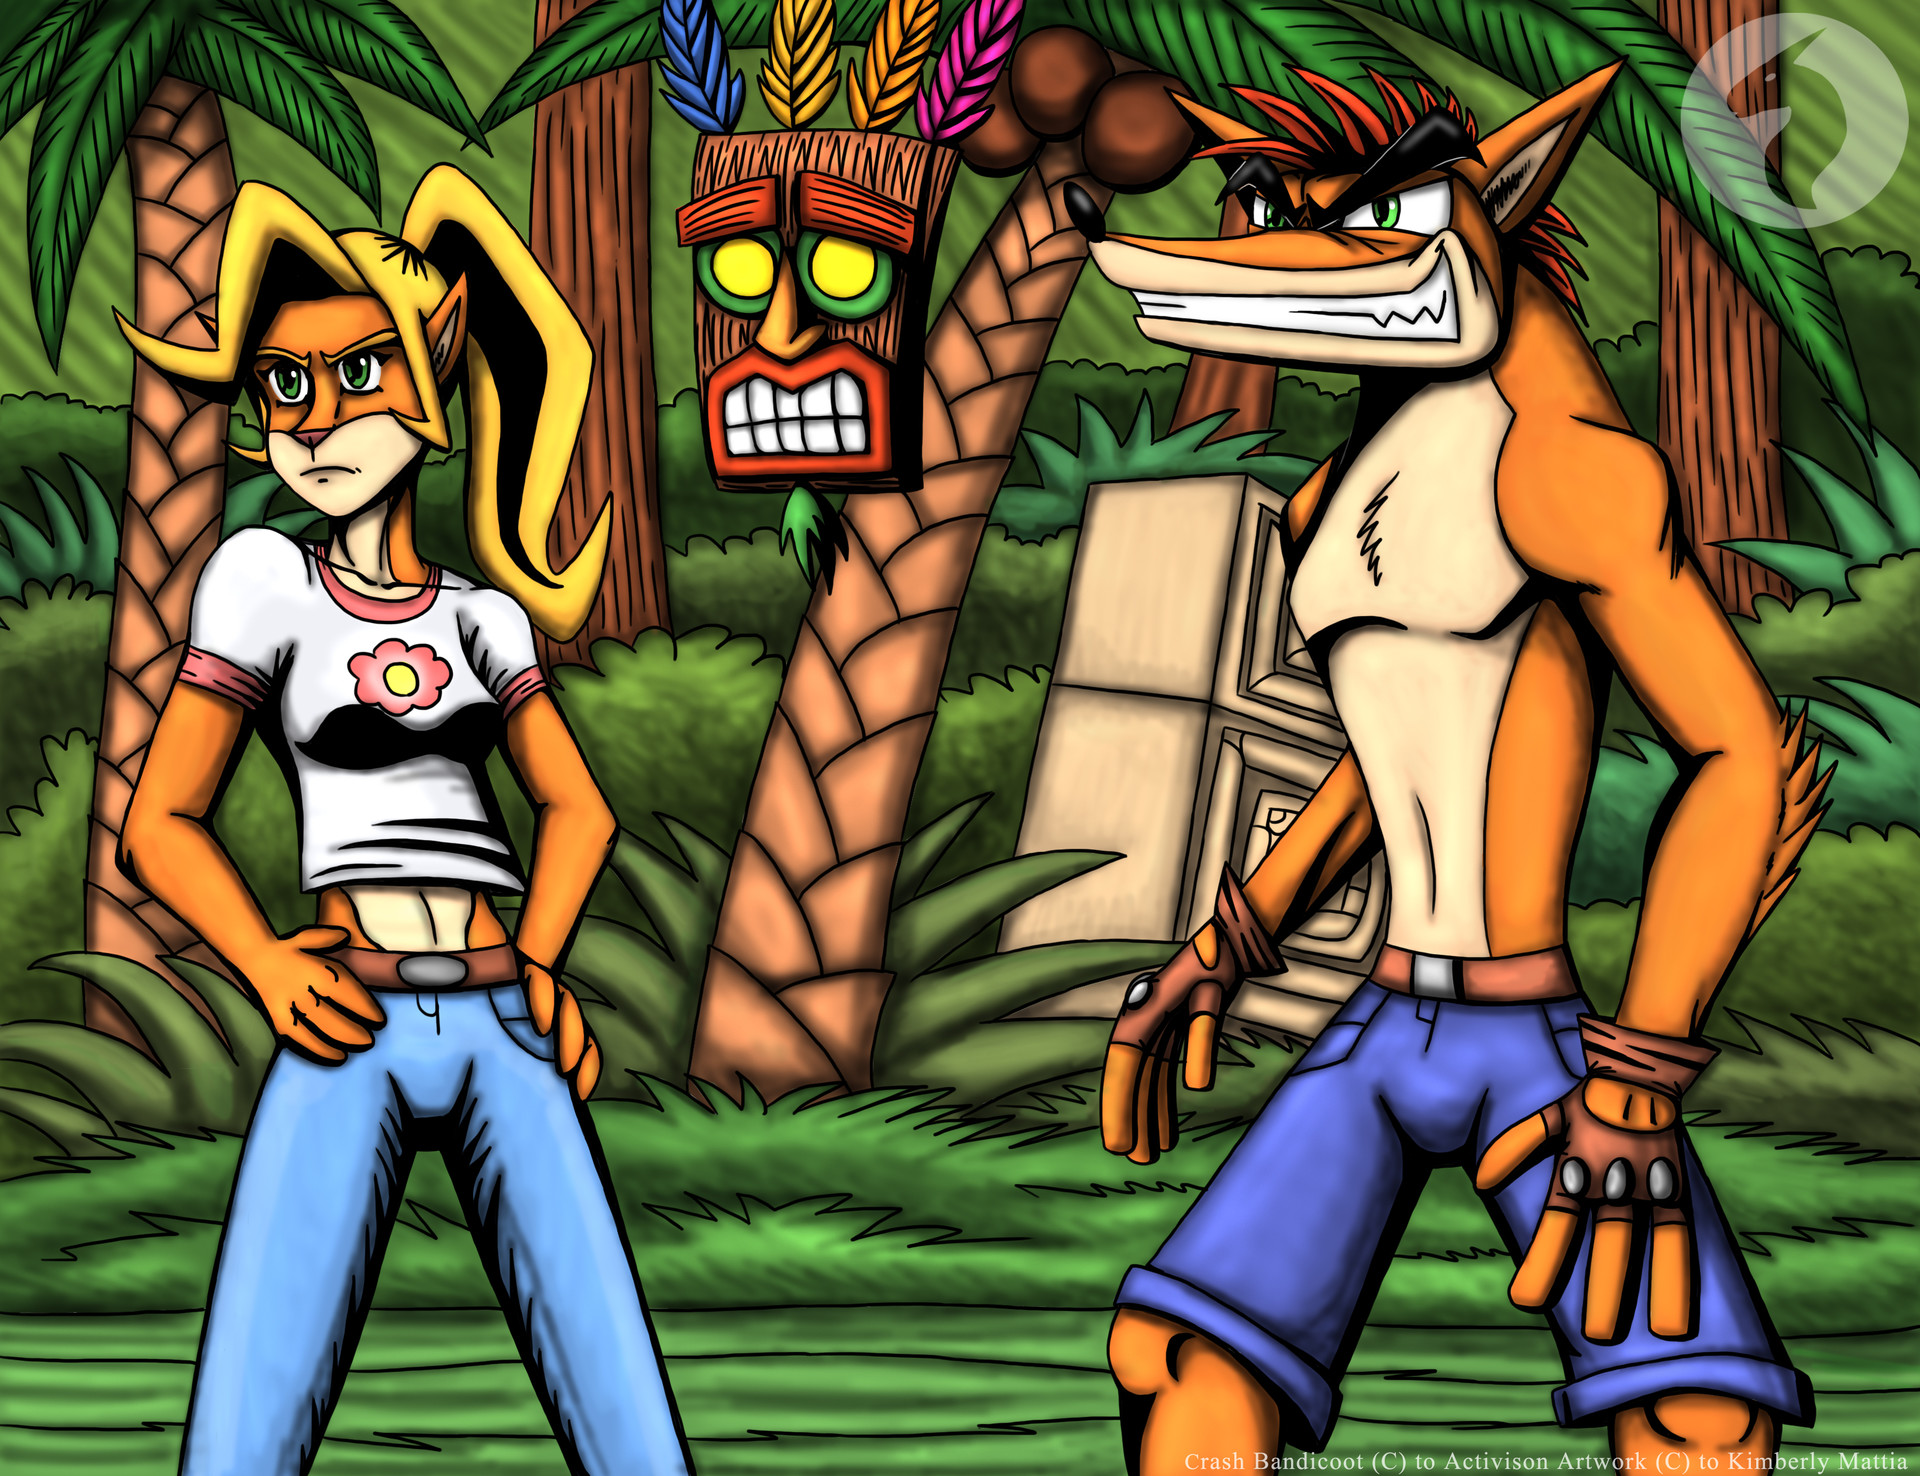 this pic was too experiment drawing crash bandicoot in different art styles